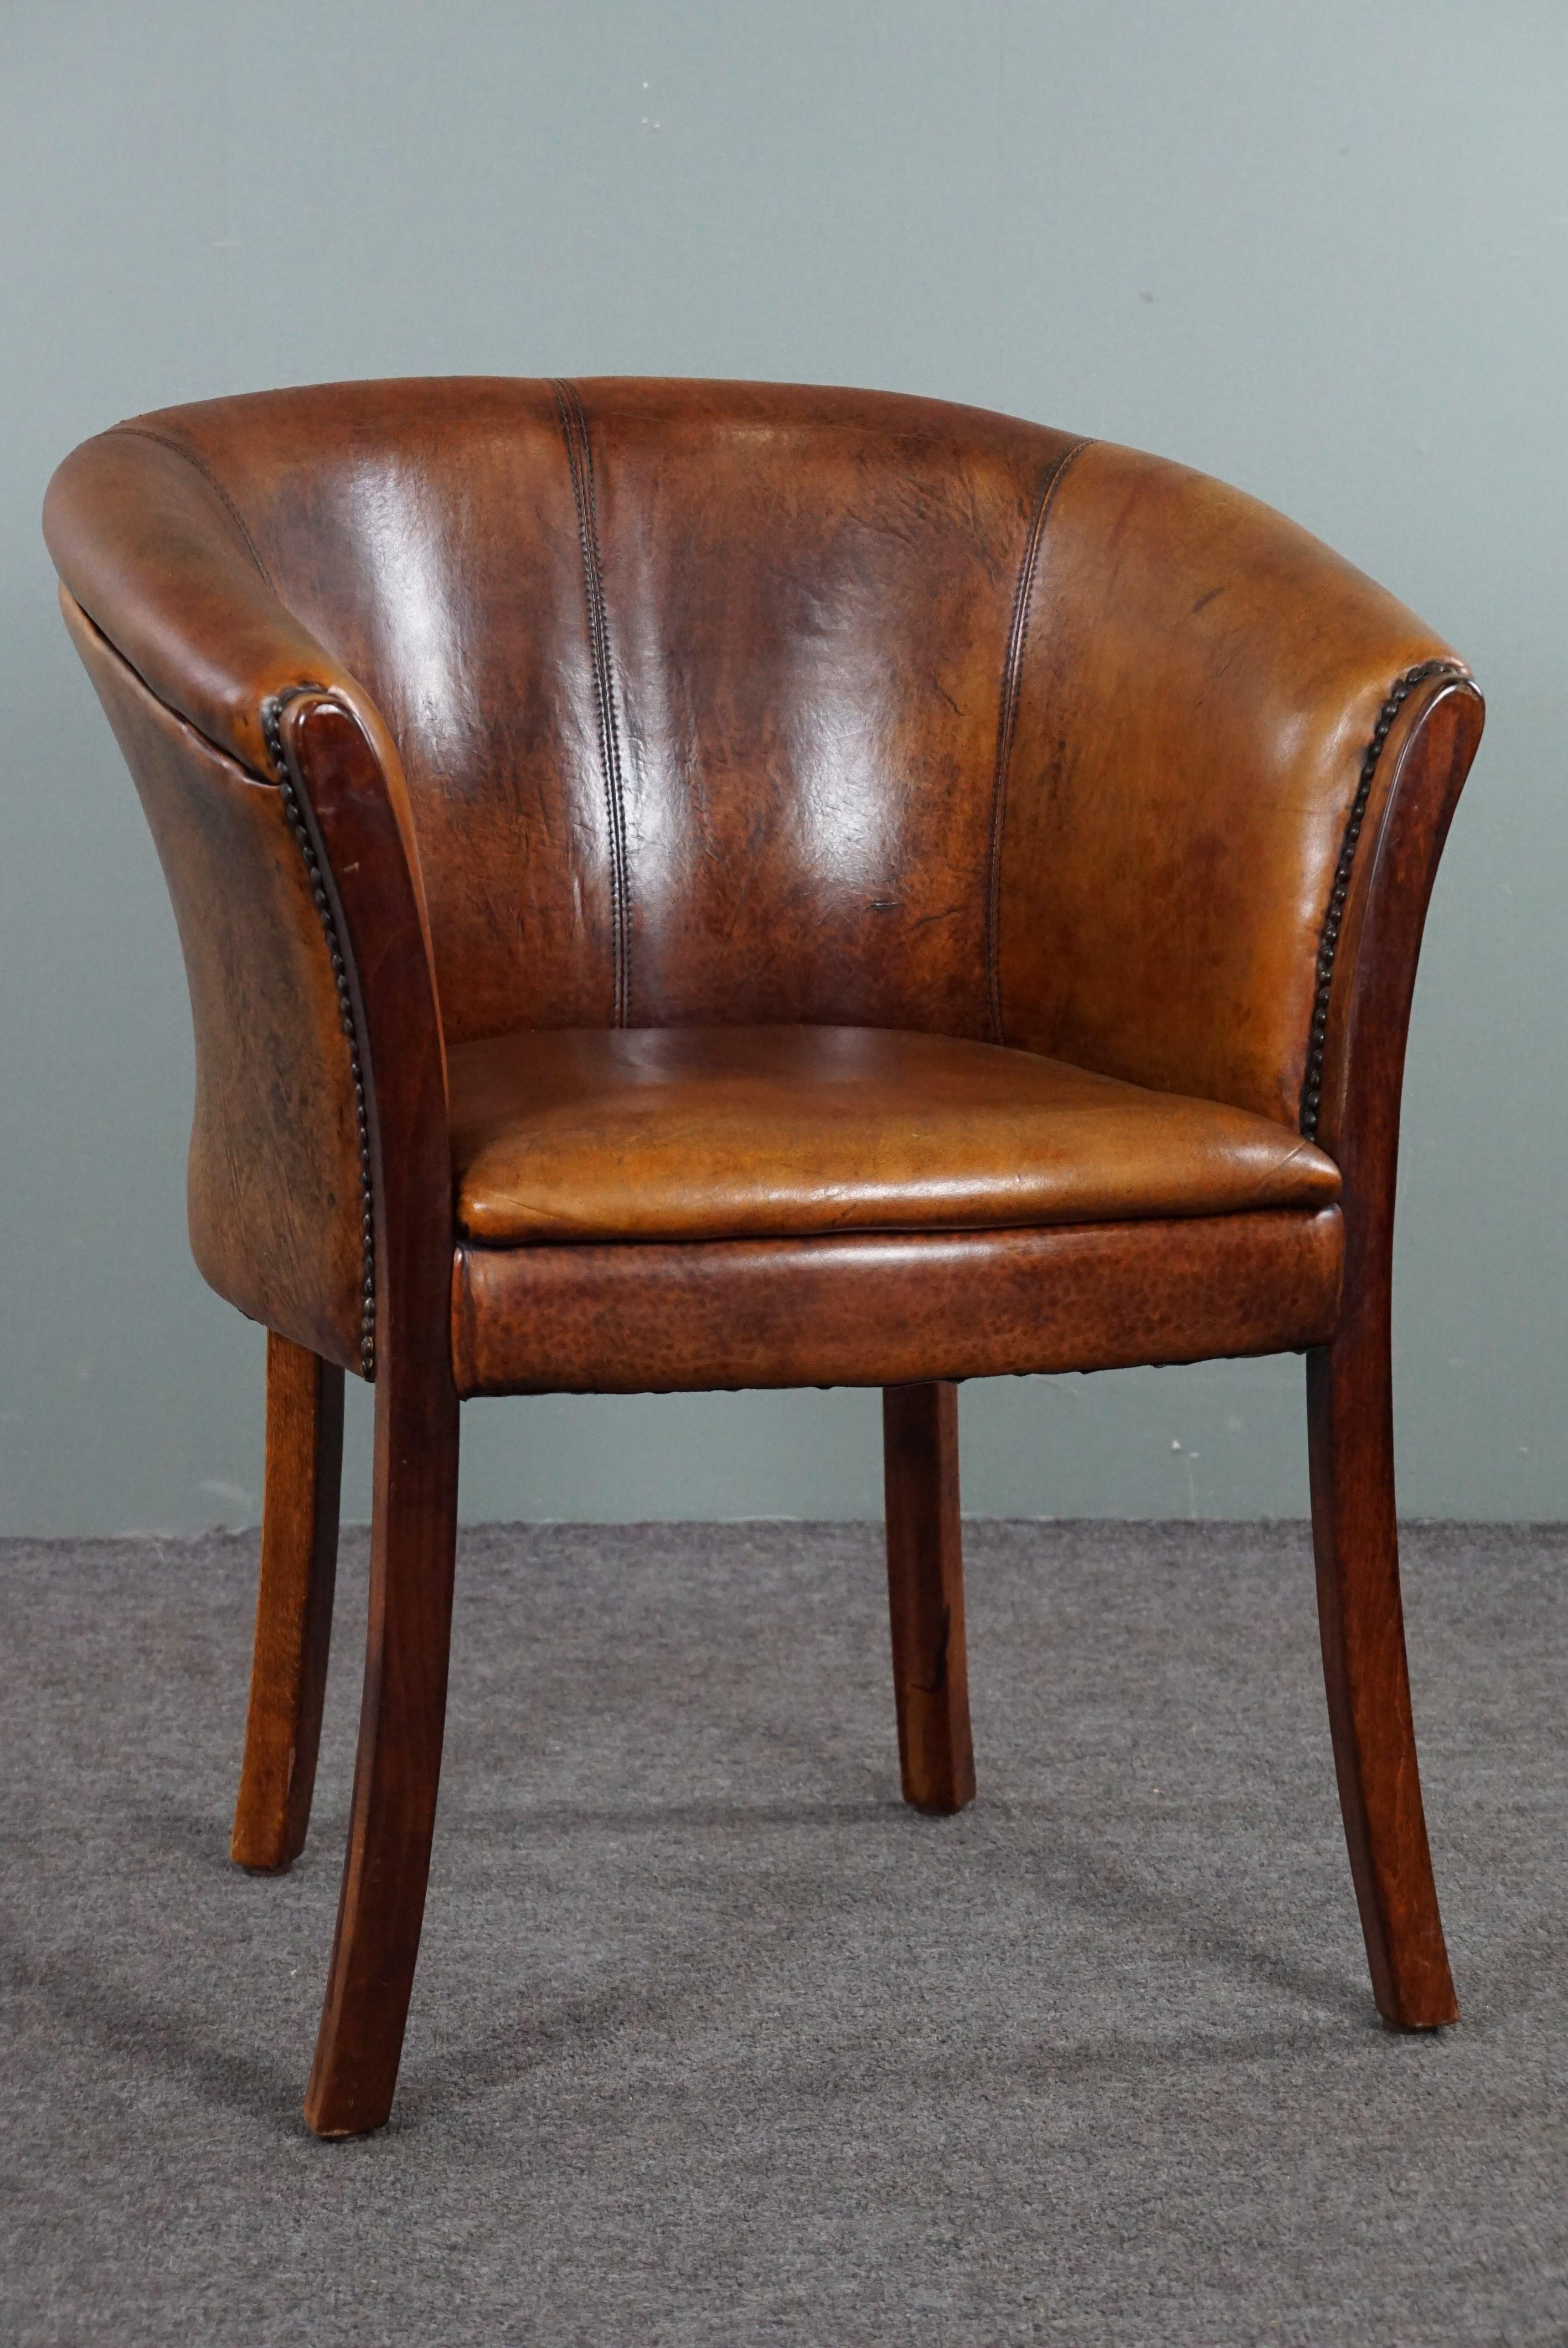 Offered is this beautiful subtle and slender sheepskin chair finished with decorative nails.

This sheep leather armchair or side chair is multifunctional due to its modest size and higher seat height. This makes this sheepskin tubchair suitable for